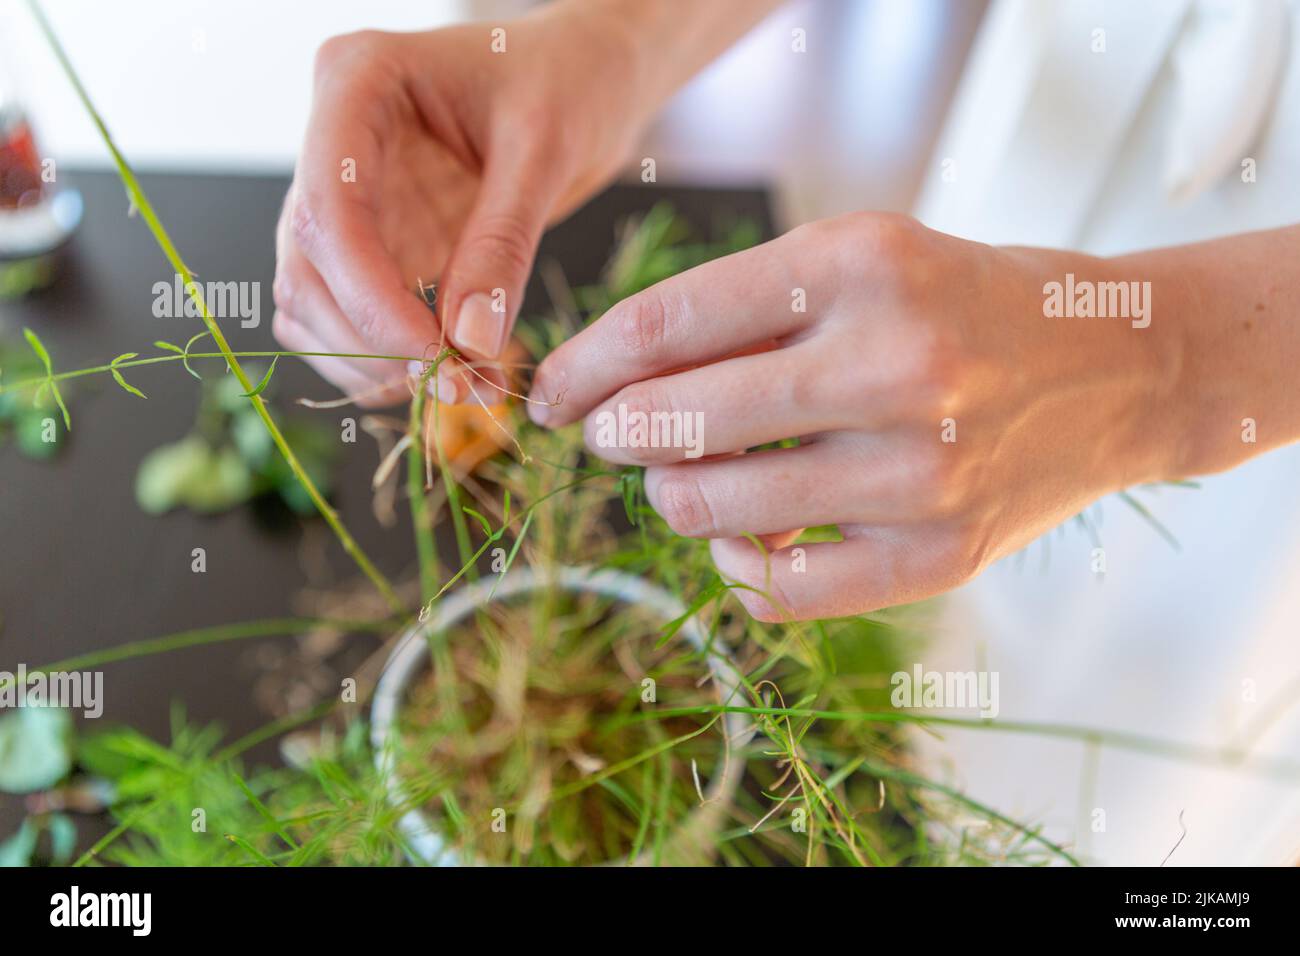 Woman hands planting a green plant at home Stock Photo